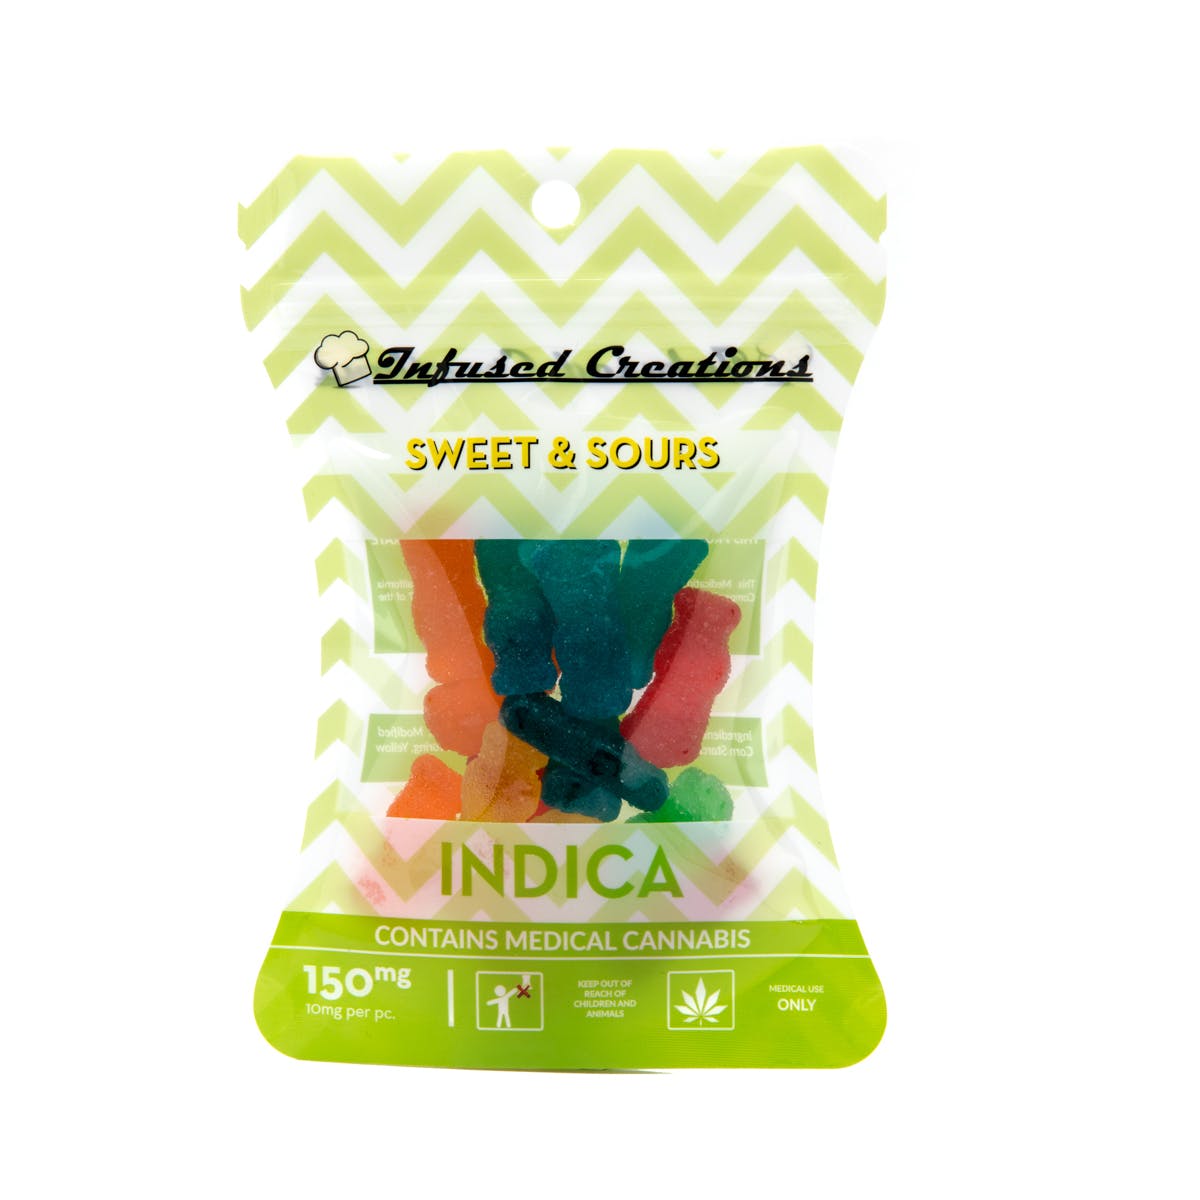 Sweet & Sours Indica, 150mg